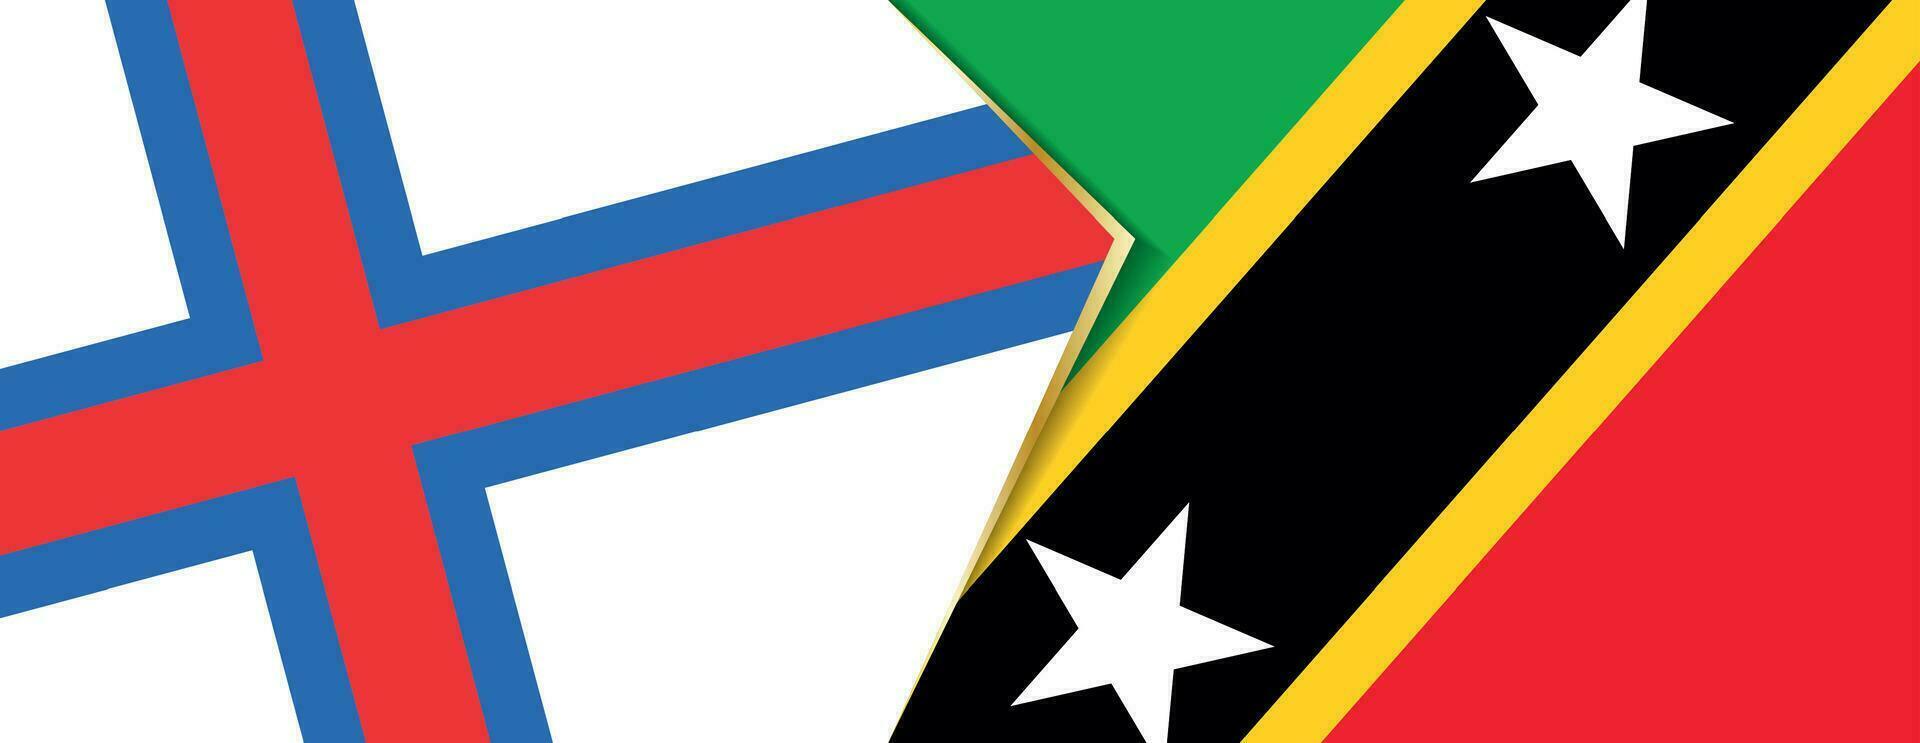 Faroe Islands and Saint Kitts and Nevis flags, two vector flags.